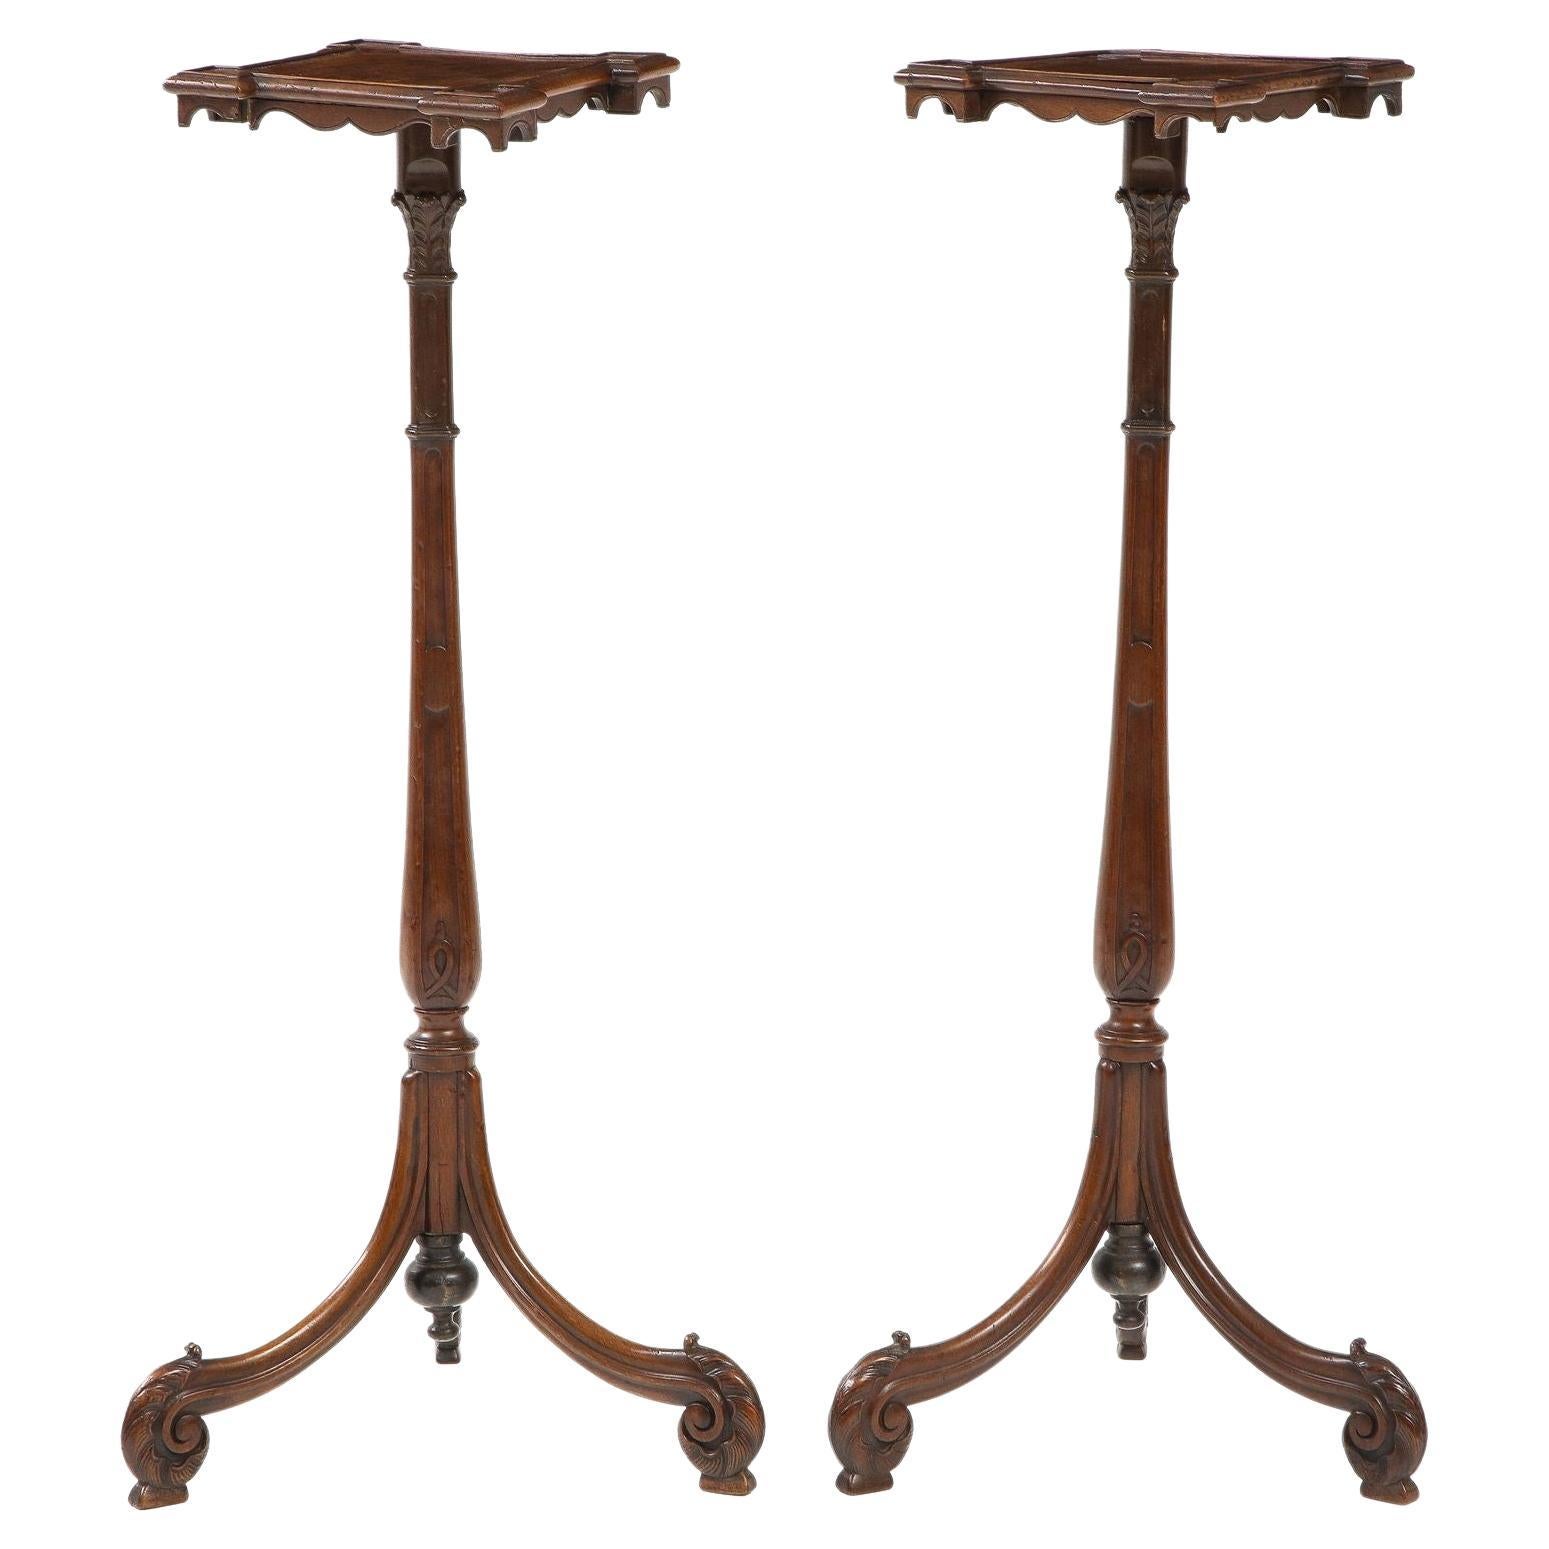 A Pair of Finely Carved Georgian Quatrefoil Mahogany Stands For Sale